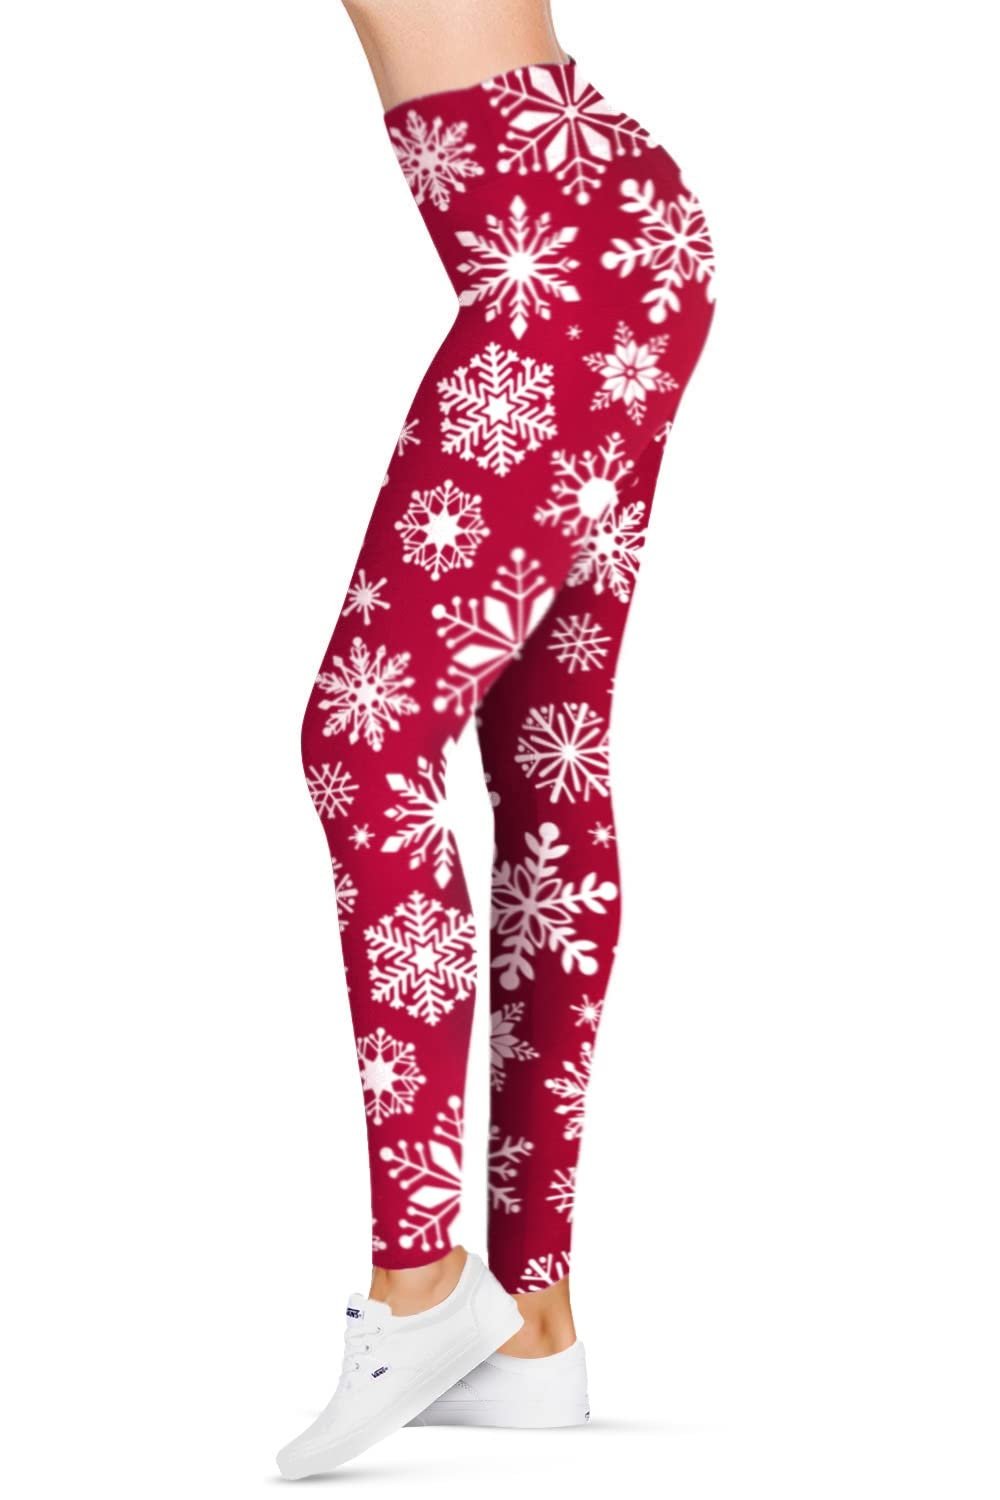 SATINA Womens Christmas Pants - Buttery Soft Highwaisted Holiday Leggings, Red Snowflake, One Size